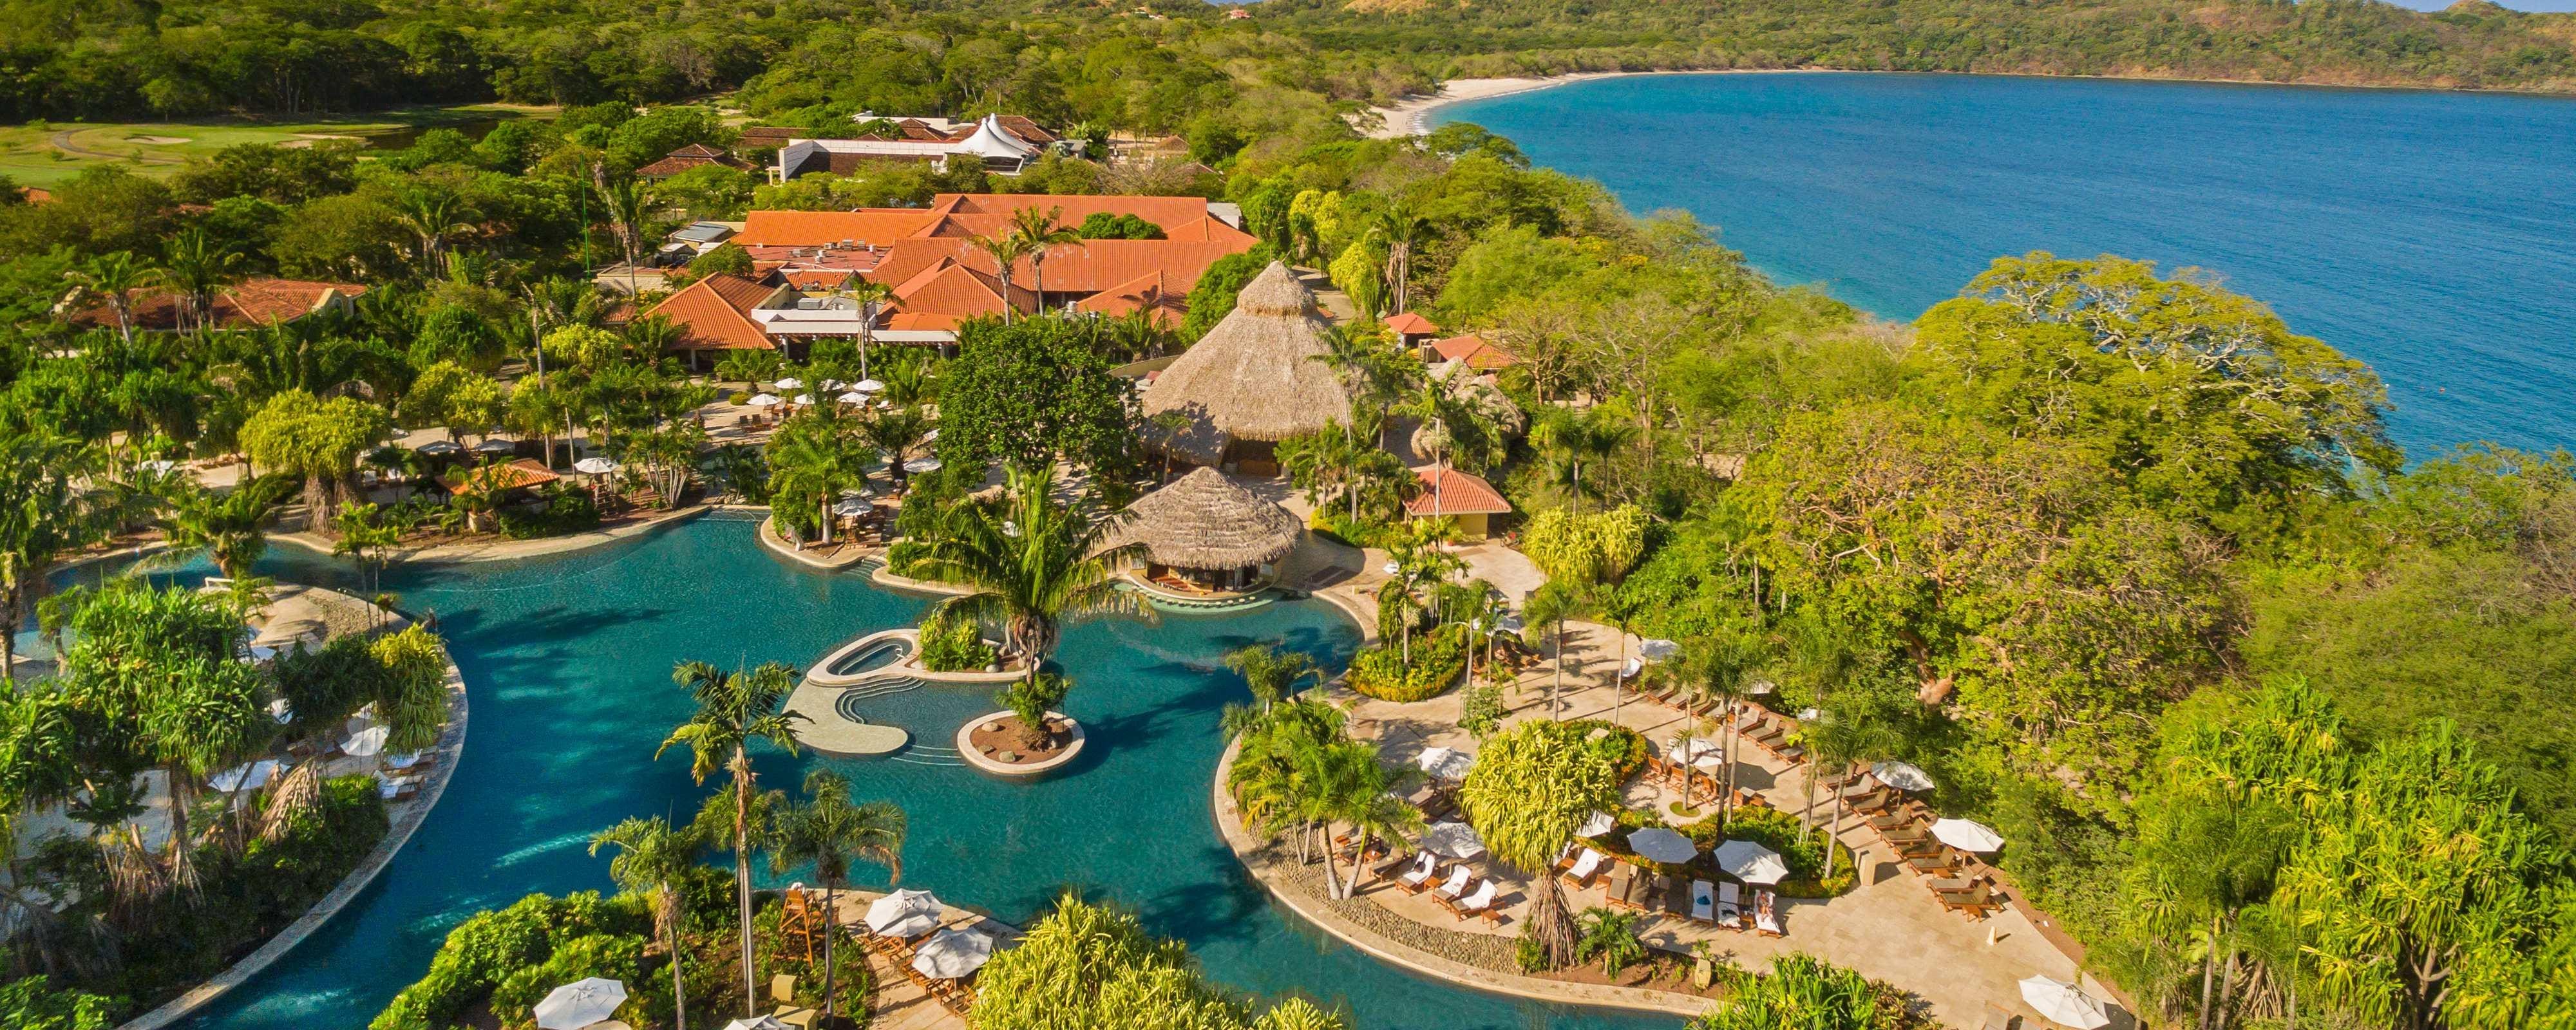 Wellness Hotel In Guanacaste The Westin Reserva Conchal An All